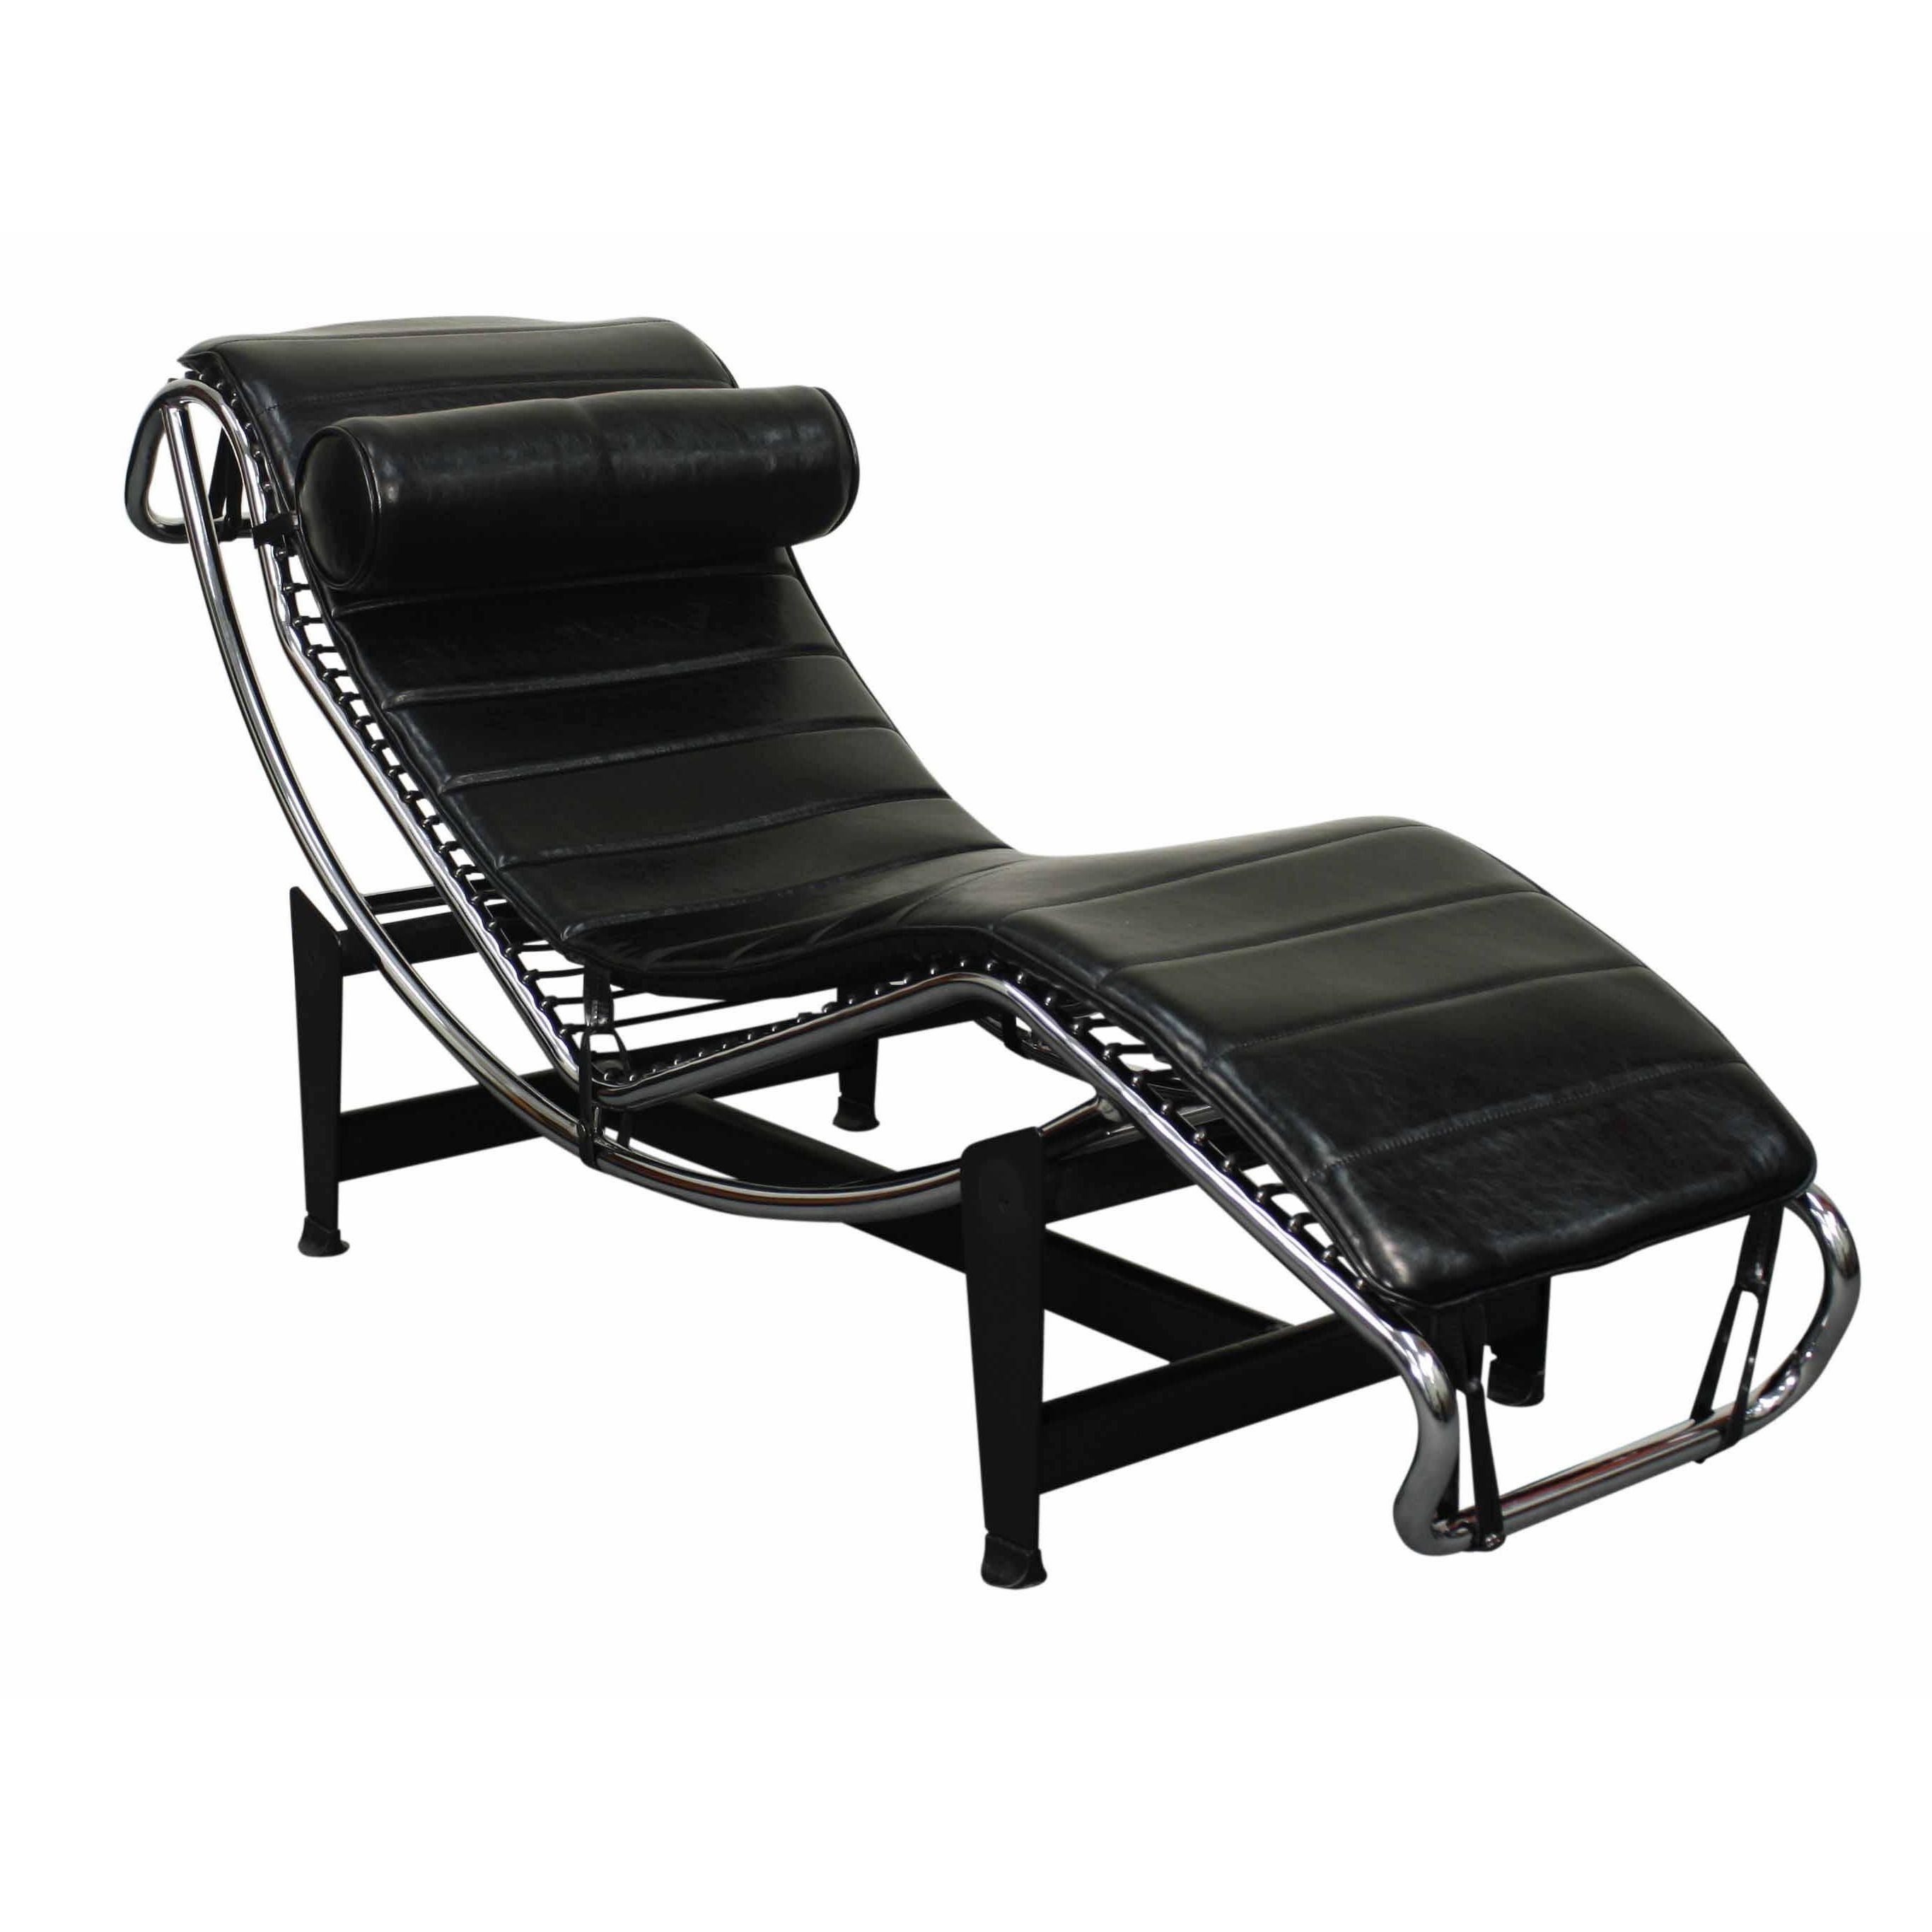 Avant Pu Chaise Lounge Chair, Chrome Steel Frame + Black Metal Pertaining To Most Popular Metal Chaise Lounge (View 12 of 15)